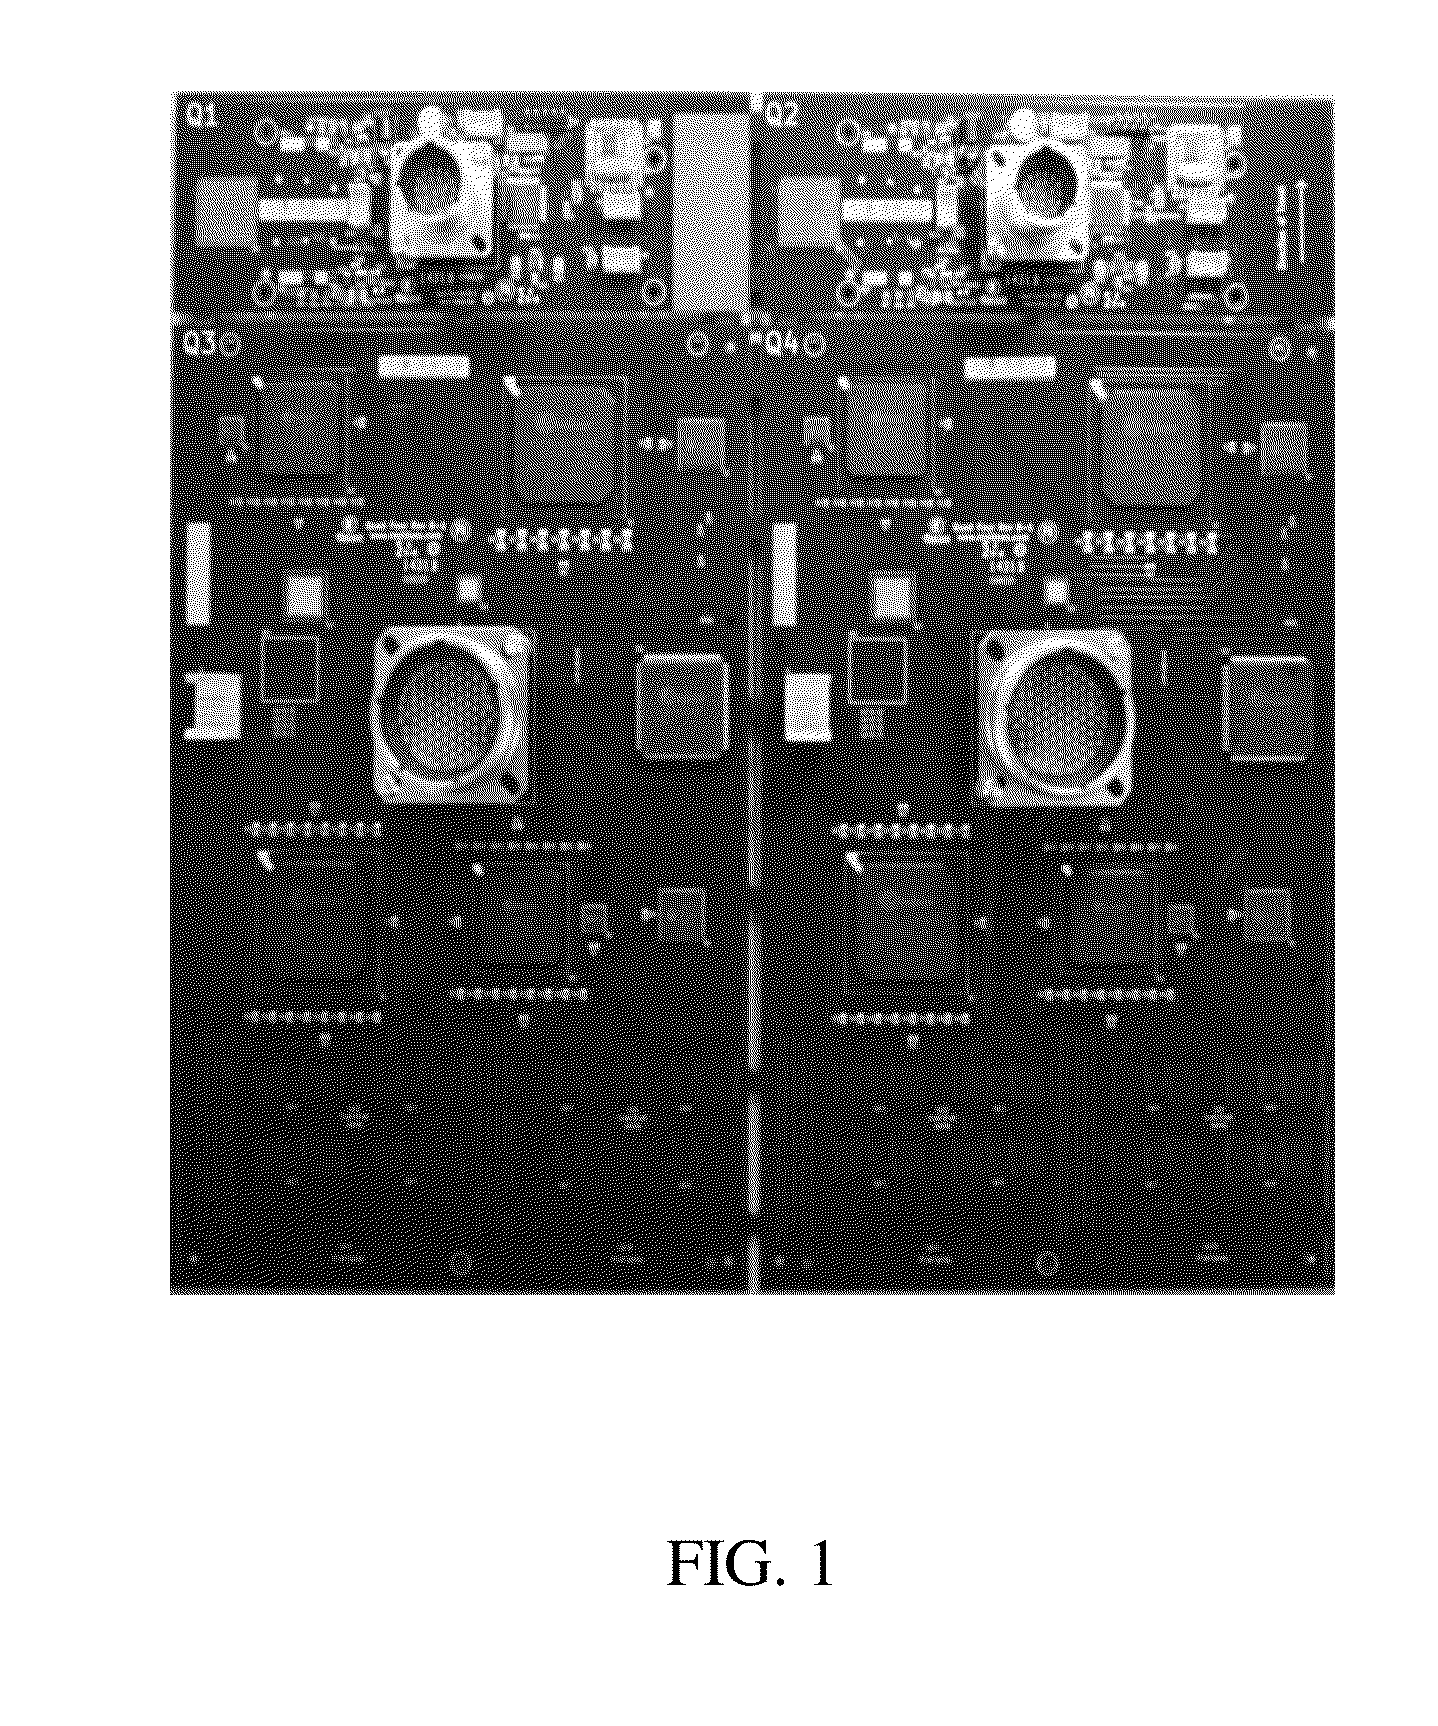 Test board and method for qualifying a printed circuit board assembly and/or repair process